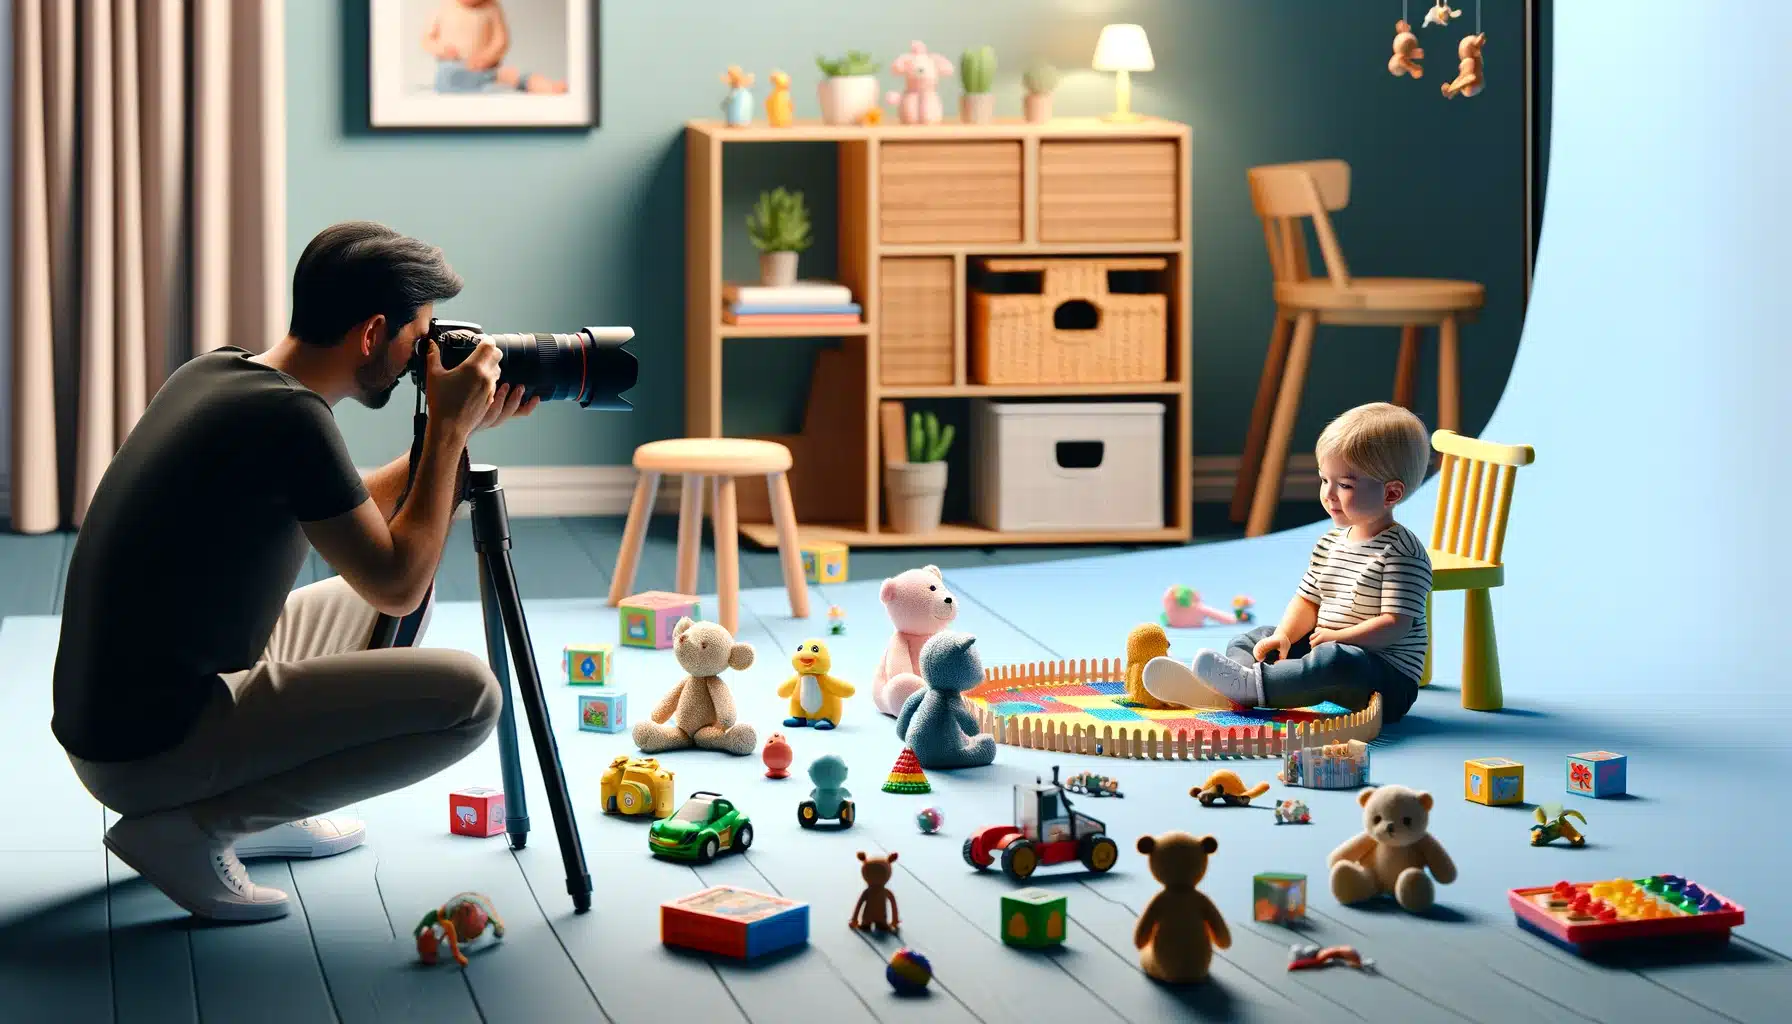 Photography session capturing a child playing with toys, with a photographer taking the photo.